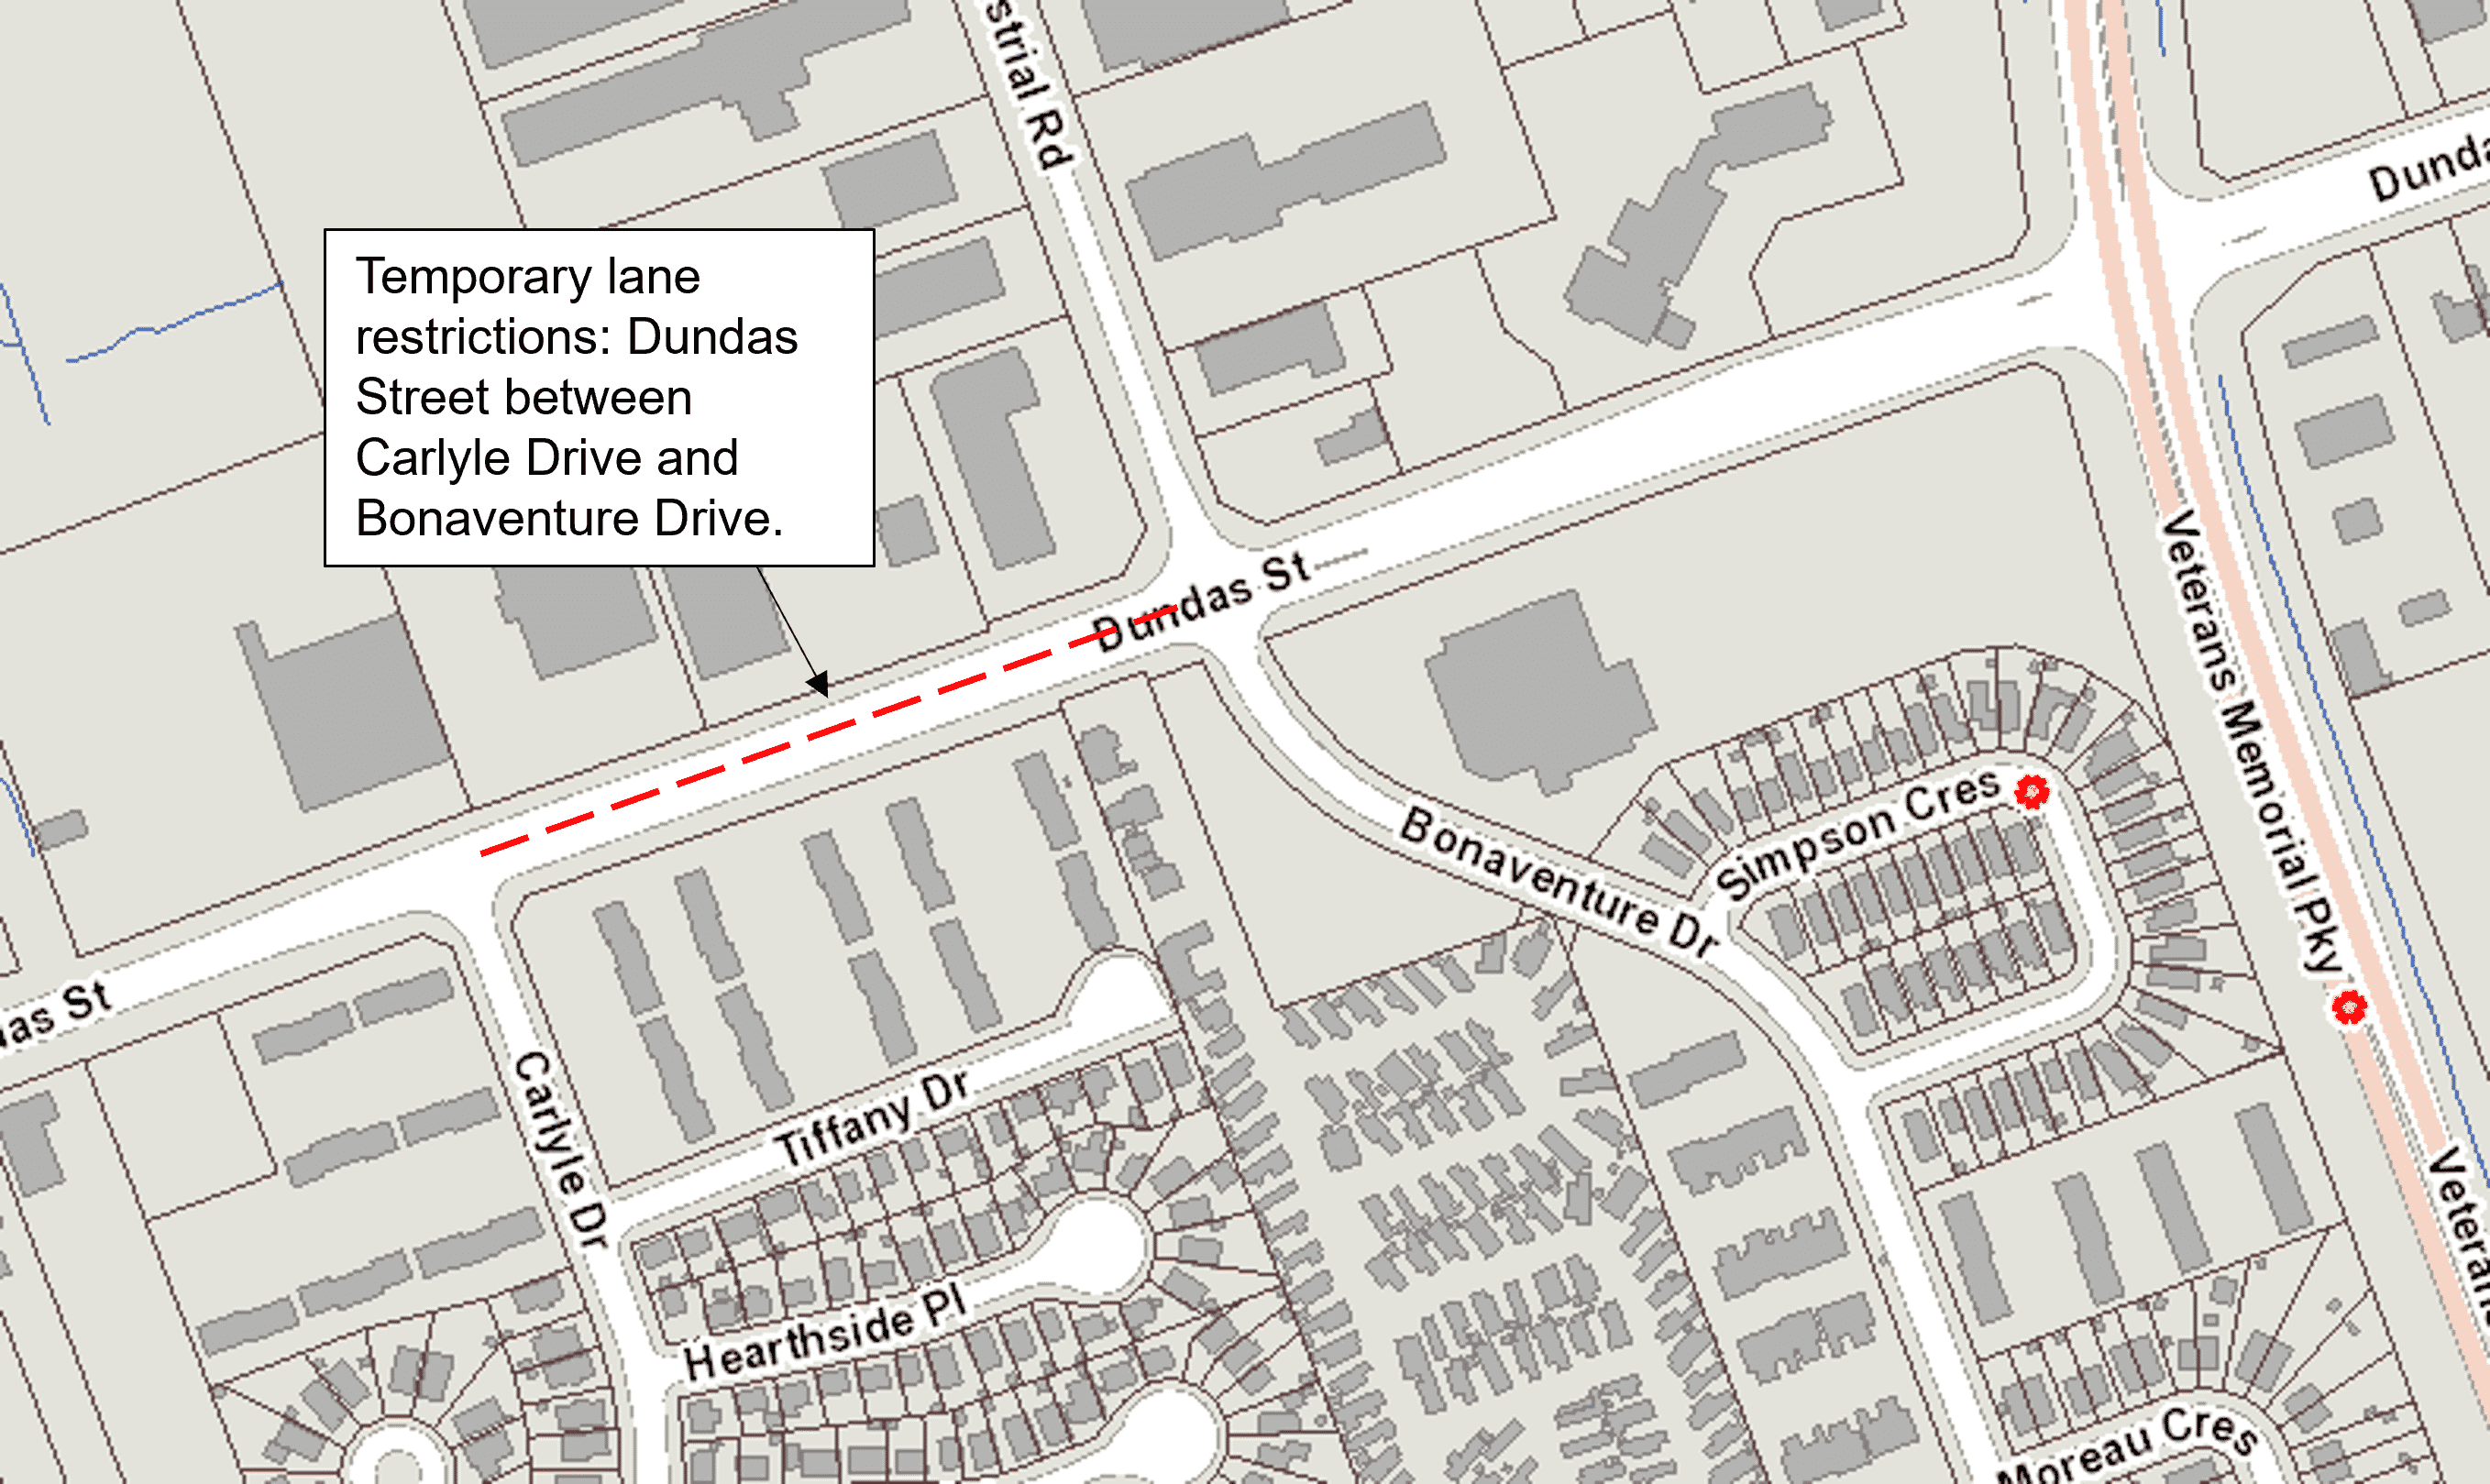 A map of the upcoming lane restrictions on Dundas Street from Carlyle Drive to Bonaventure Drive.